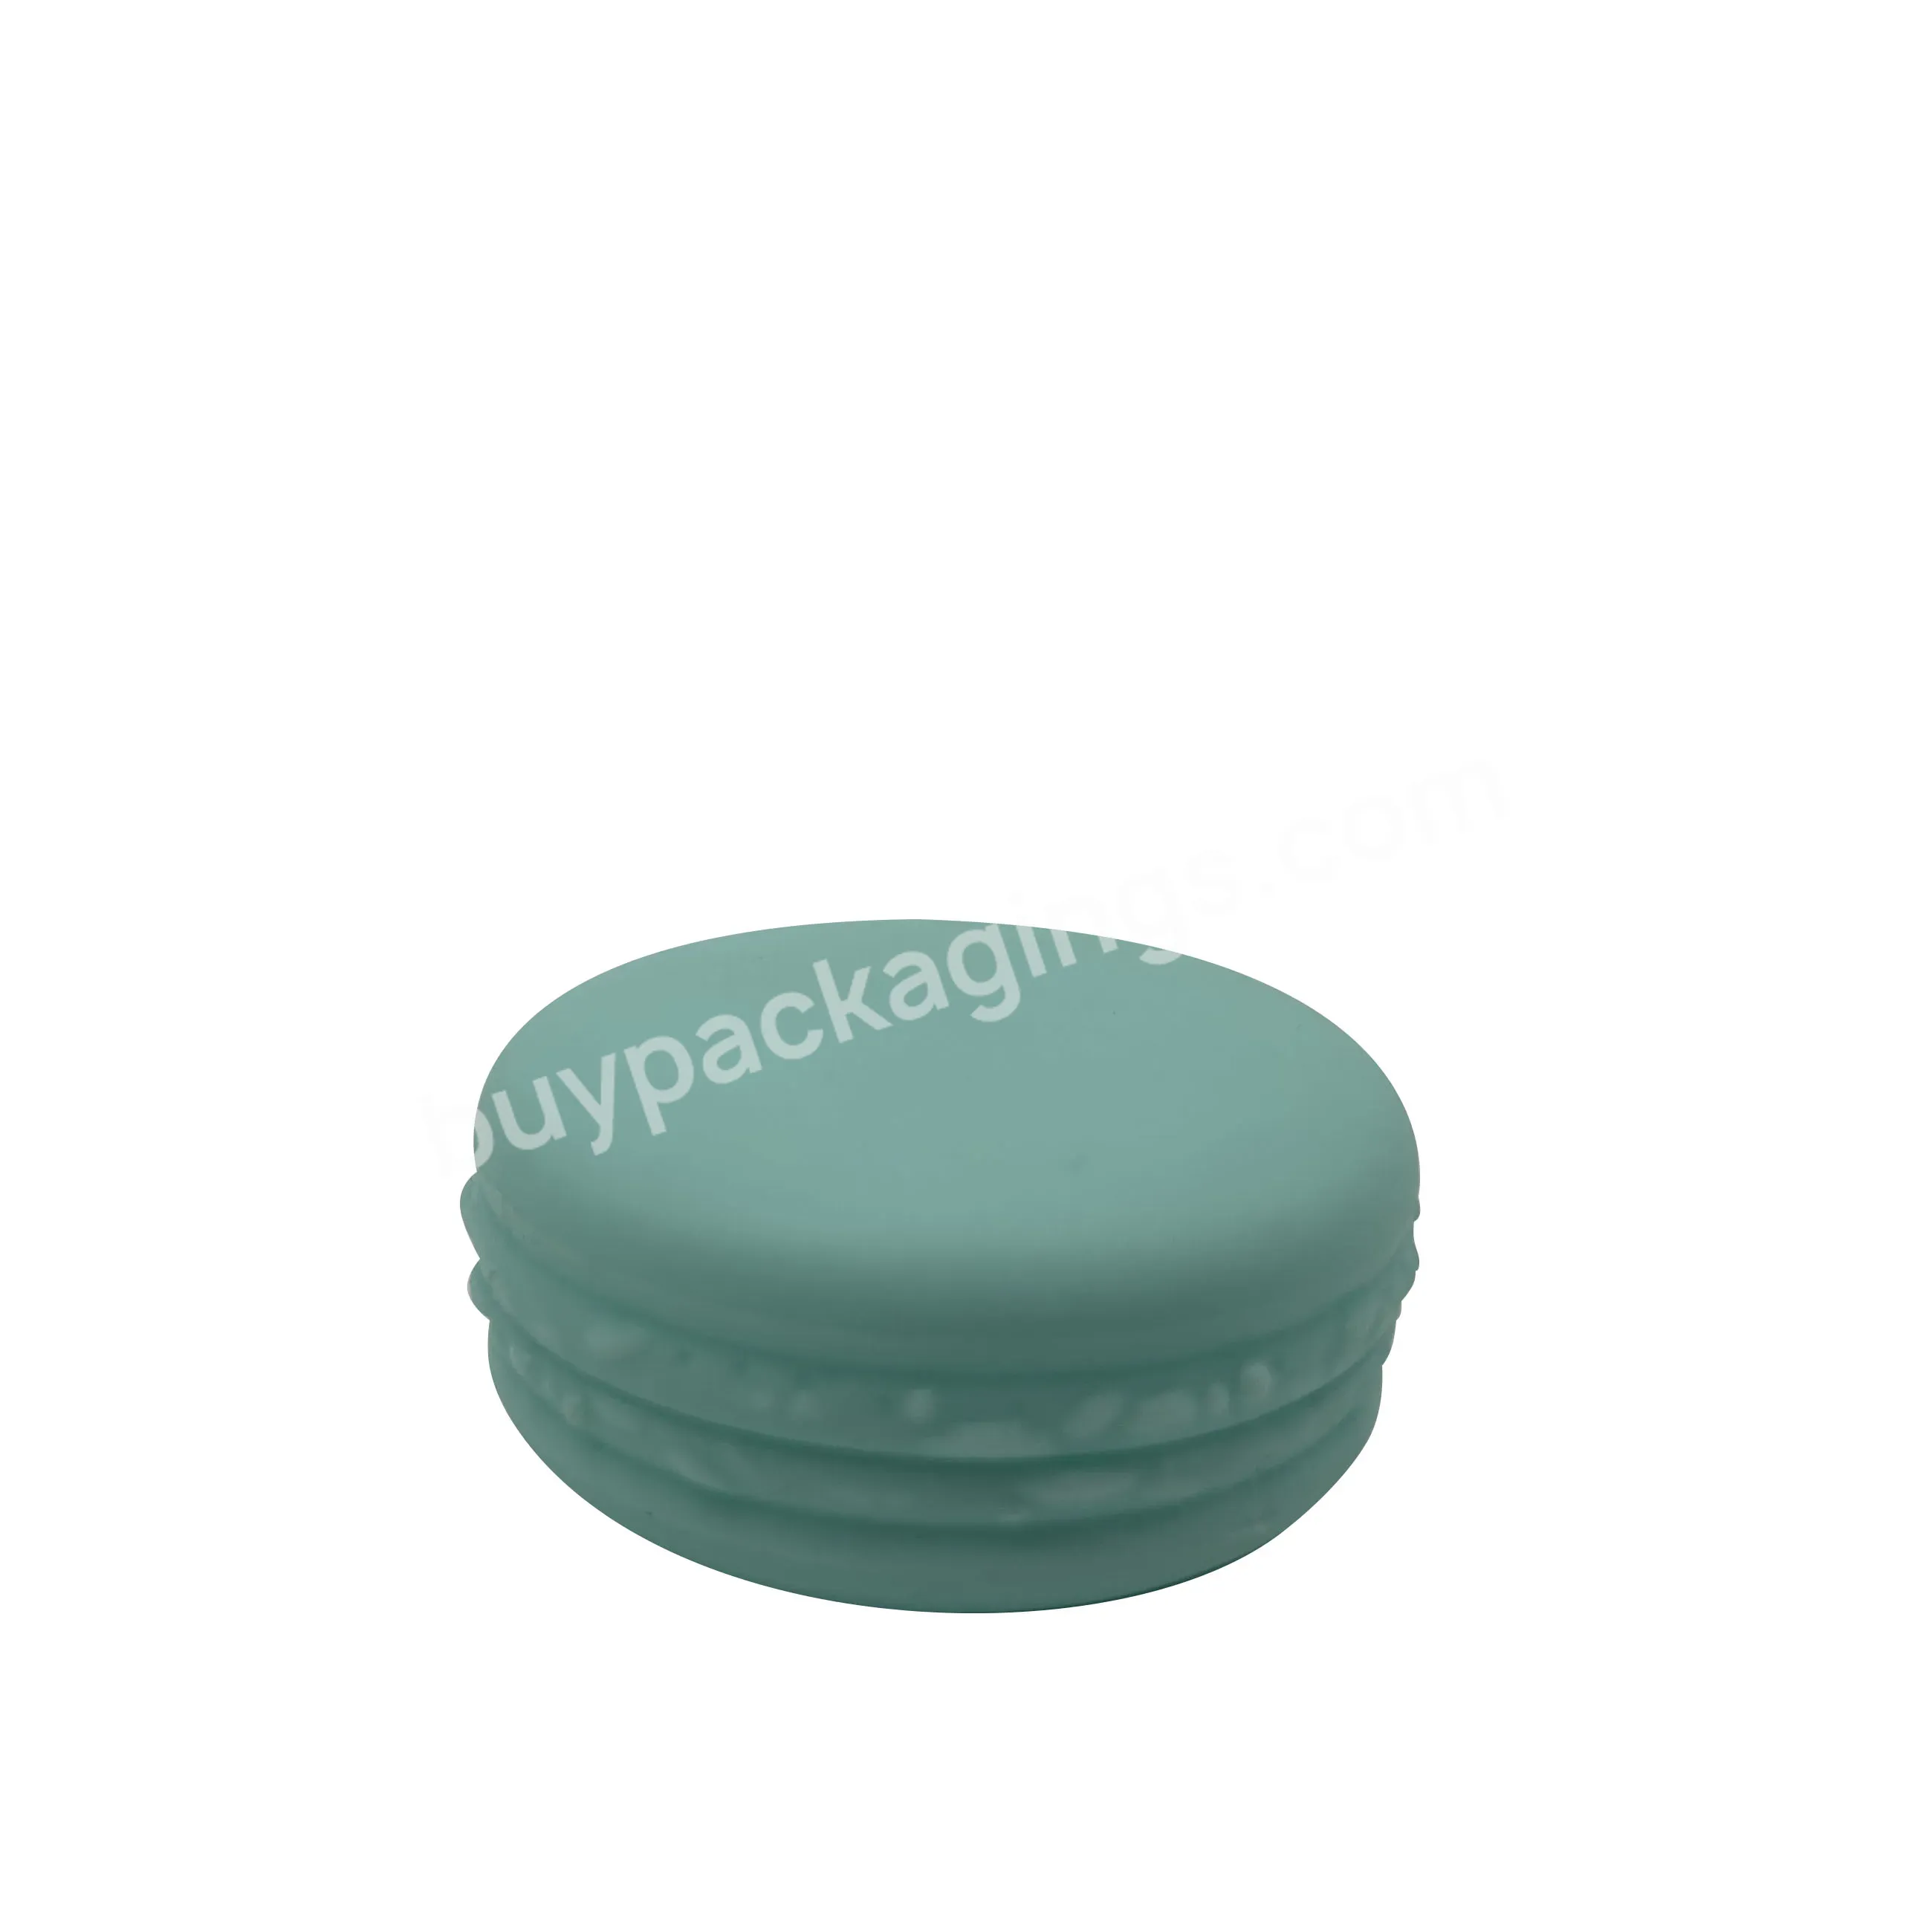 Pp Macron Cream Plastic Box 10g Cream Box Macaron Face Cream Bottle In Separate Boxes - Buy Easy To Carry,Dispensing Boxes,Face Paint Bottles.